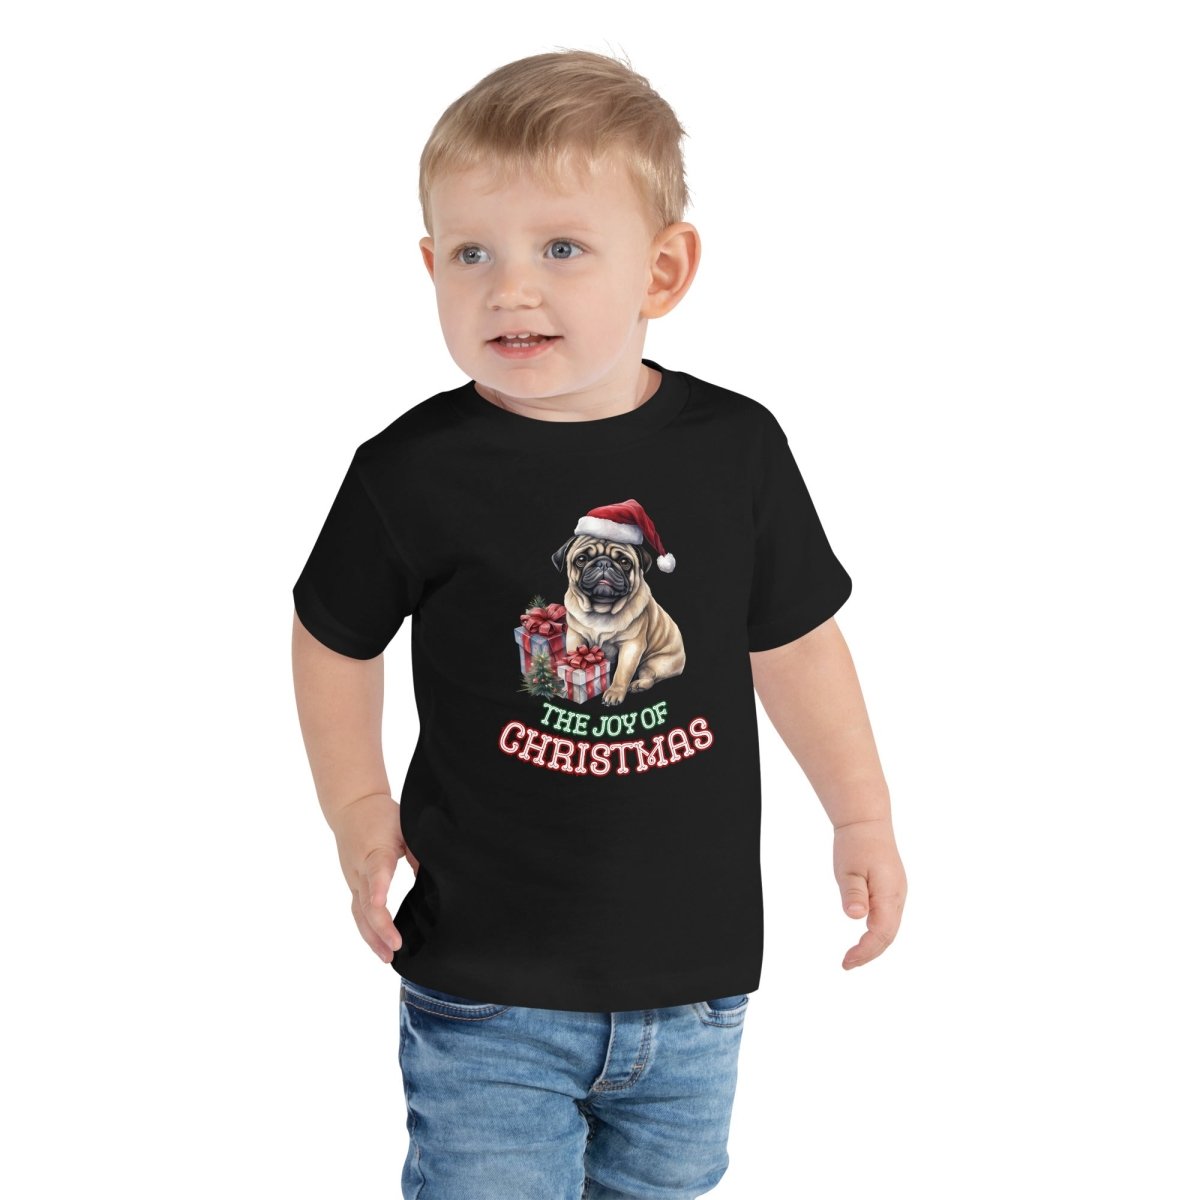 Christmas Pug T-Shirt - High Quality Festive Children T-Shirt, Gift for Kid, Gift for Doglovers, Funny Toddler Xmas Shirt - Everything Pixel